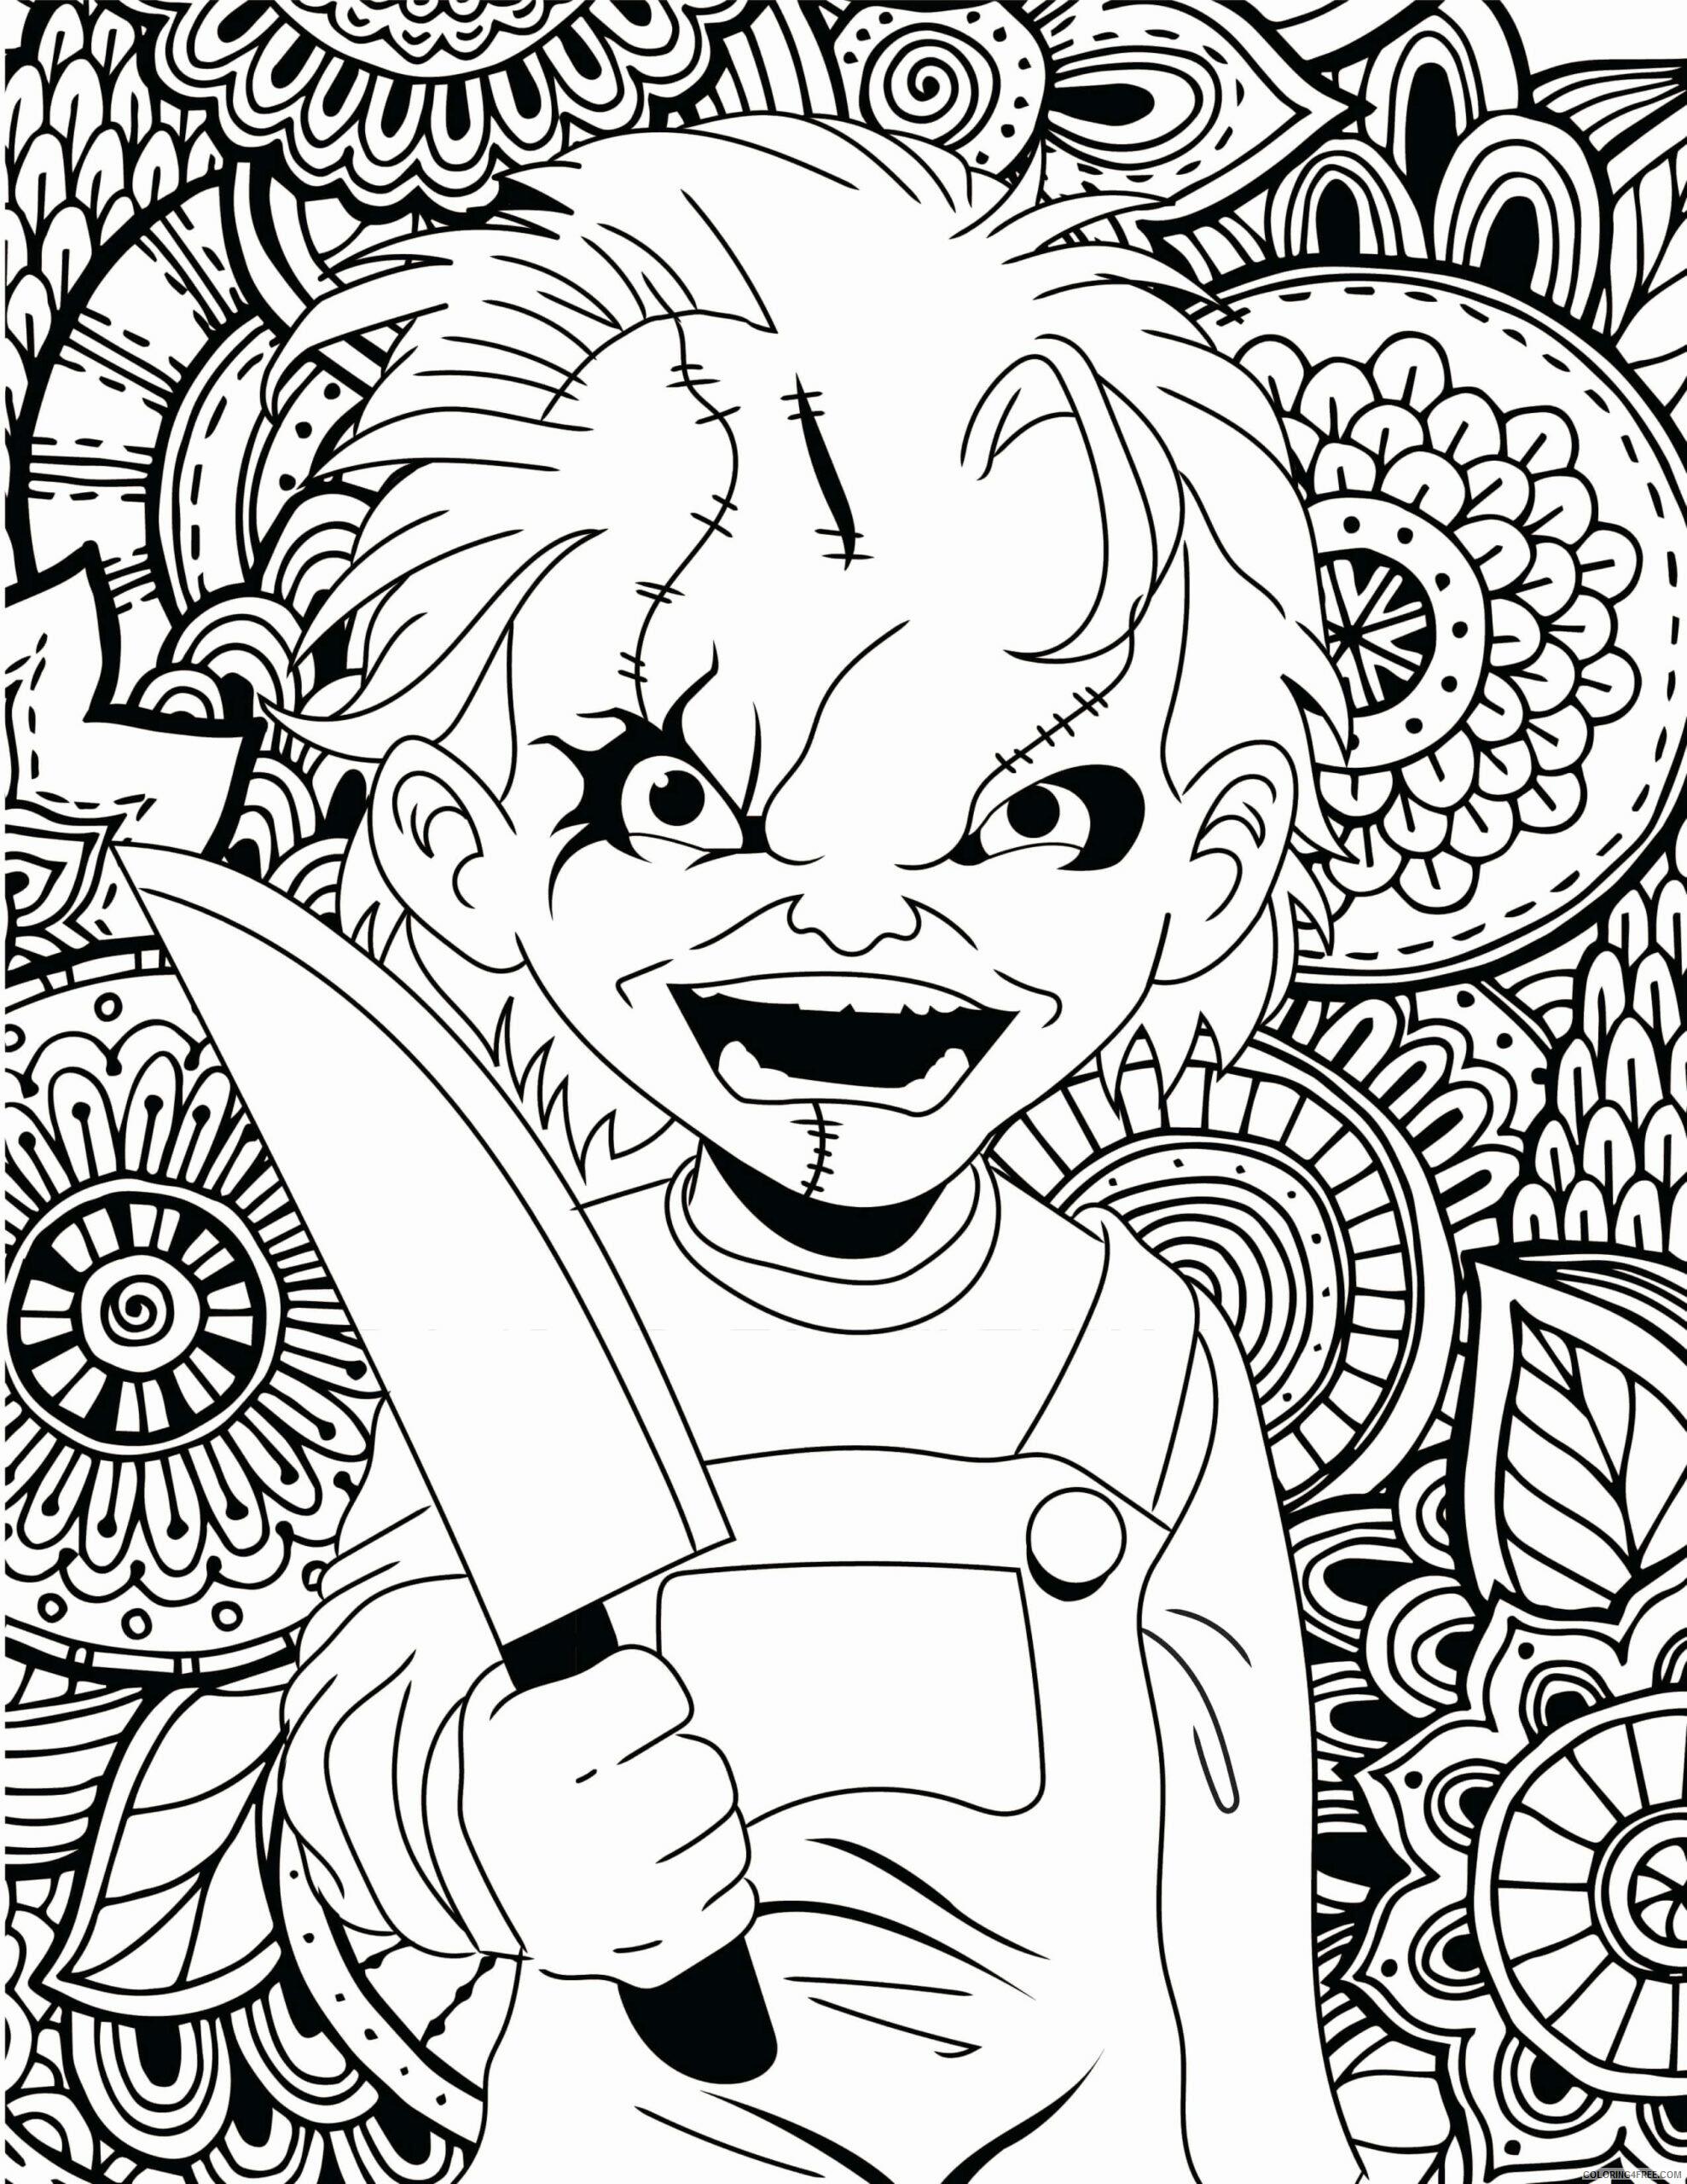 Halloween Coloring Pages Holiday 1539740826_halloween costumes 27v halloween costume fresh charming ideas pennywise horror movies Printable 2021 0594 Coloring4free